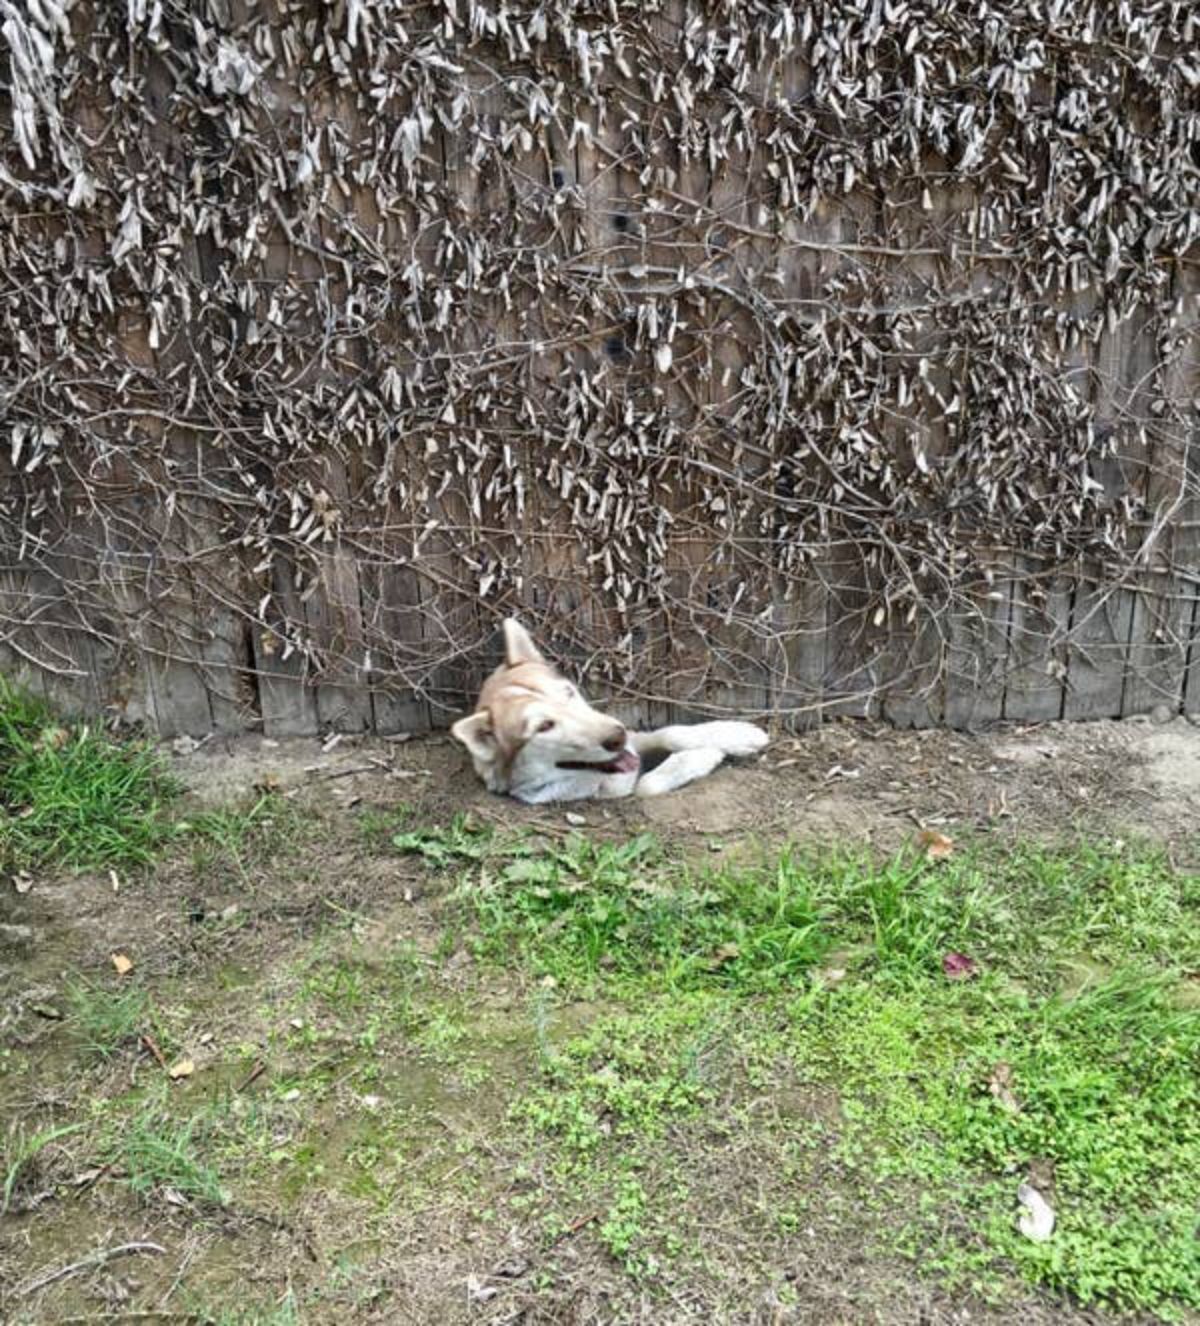 brown and white dog poking head out of hole dug under a brown wooden fence